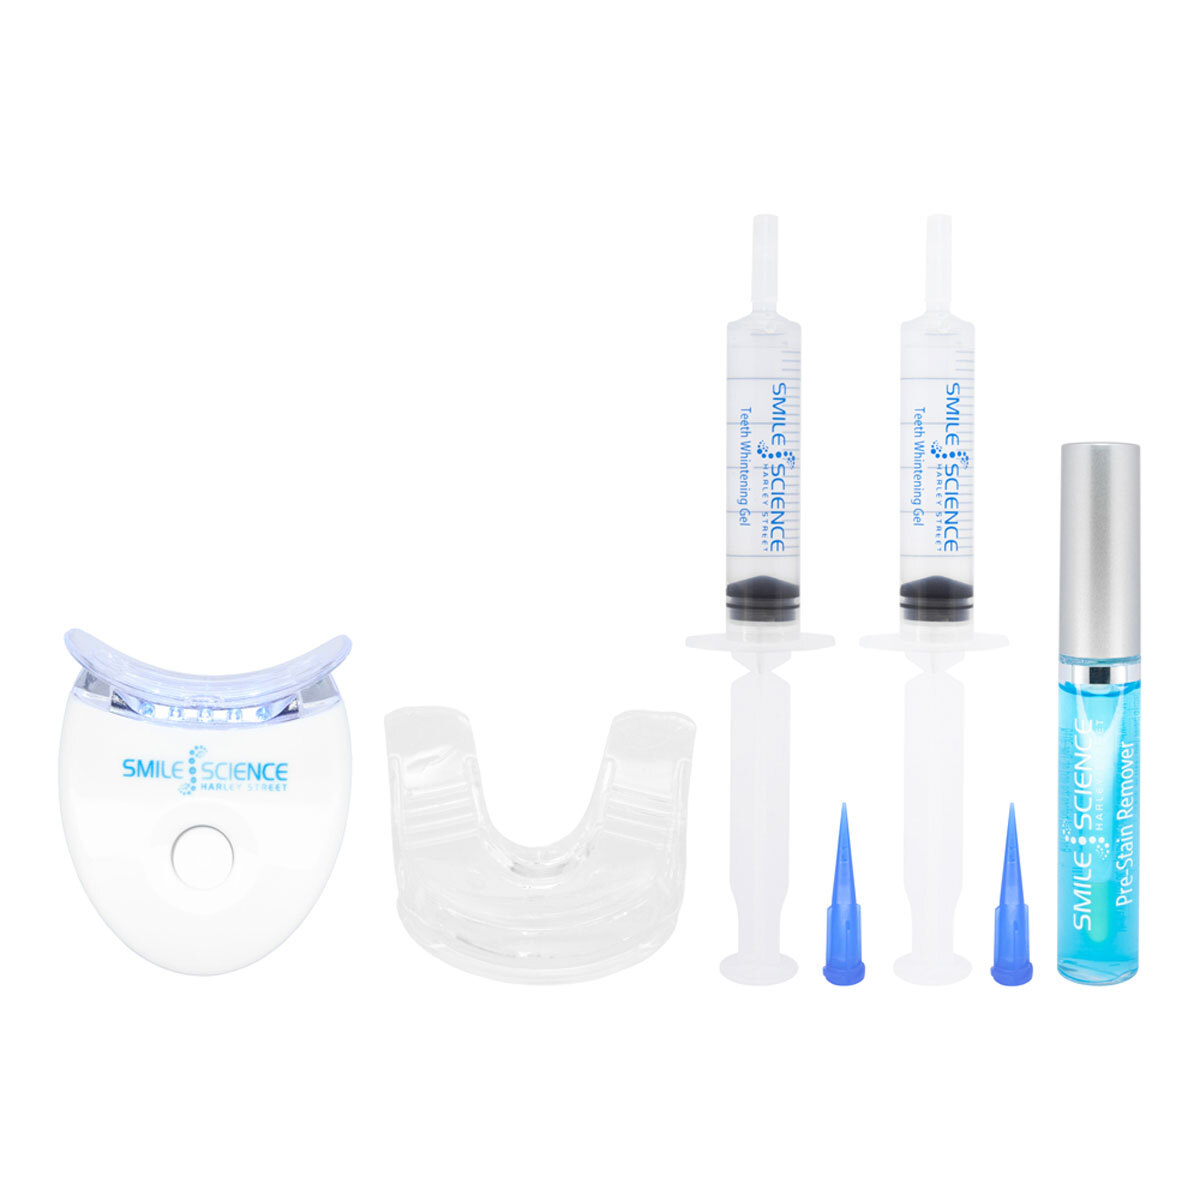 Individual Parts of the Teeth Whitening Kit